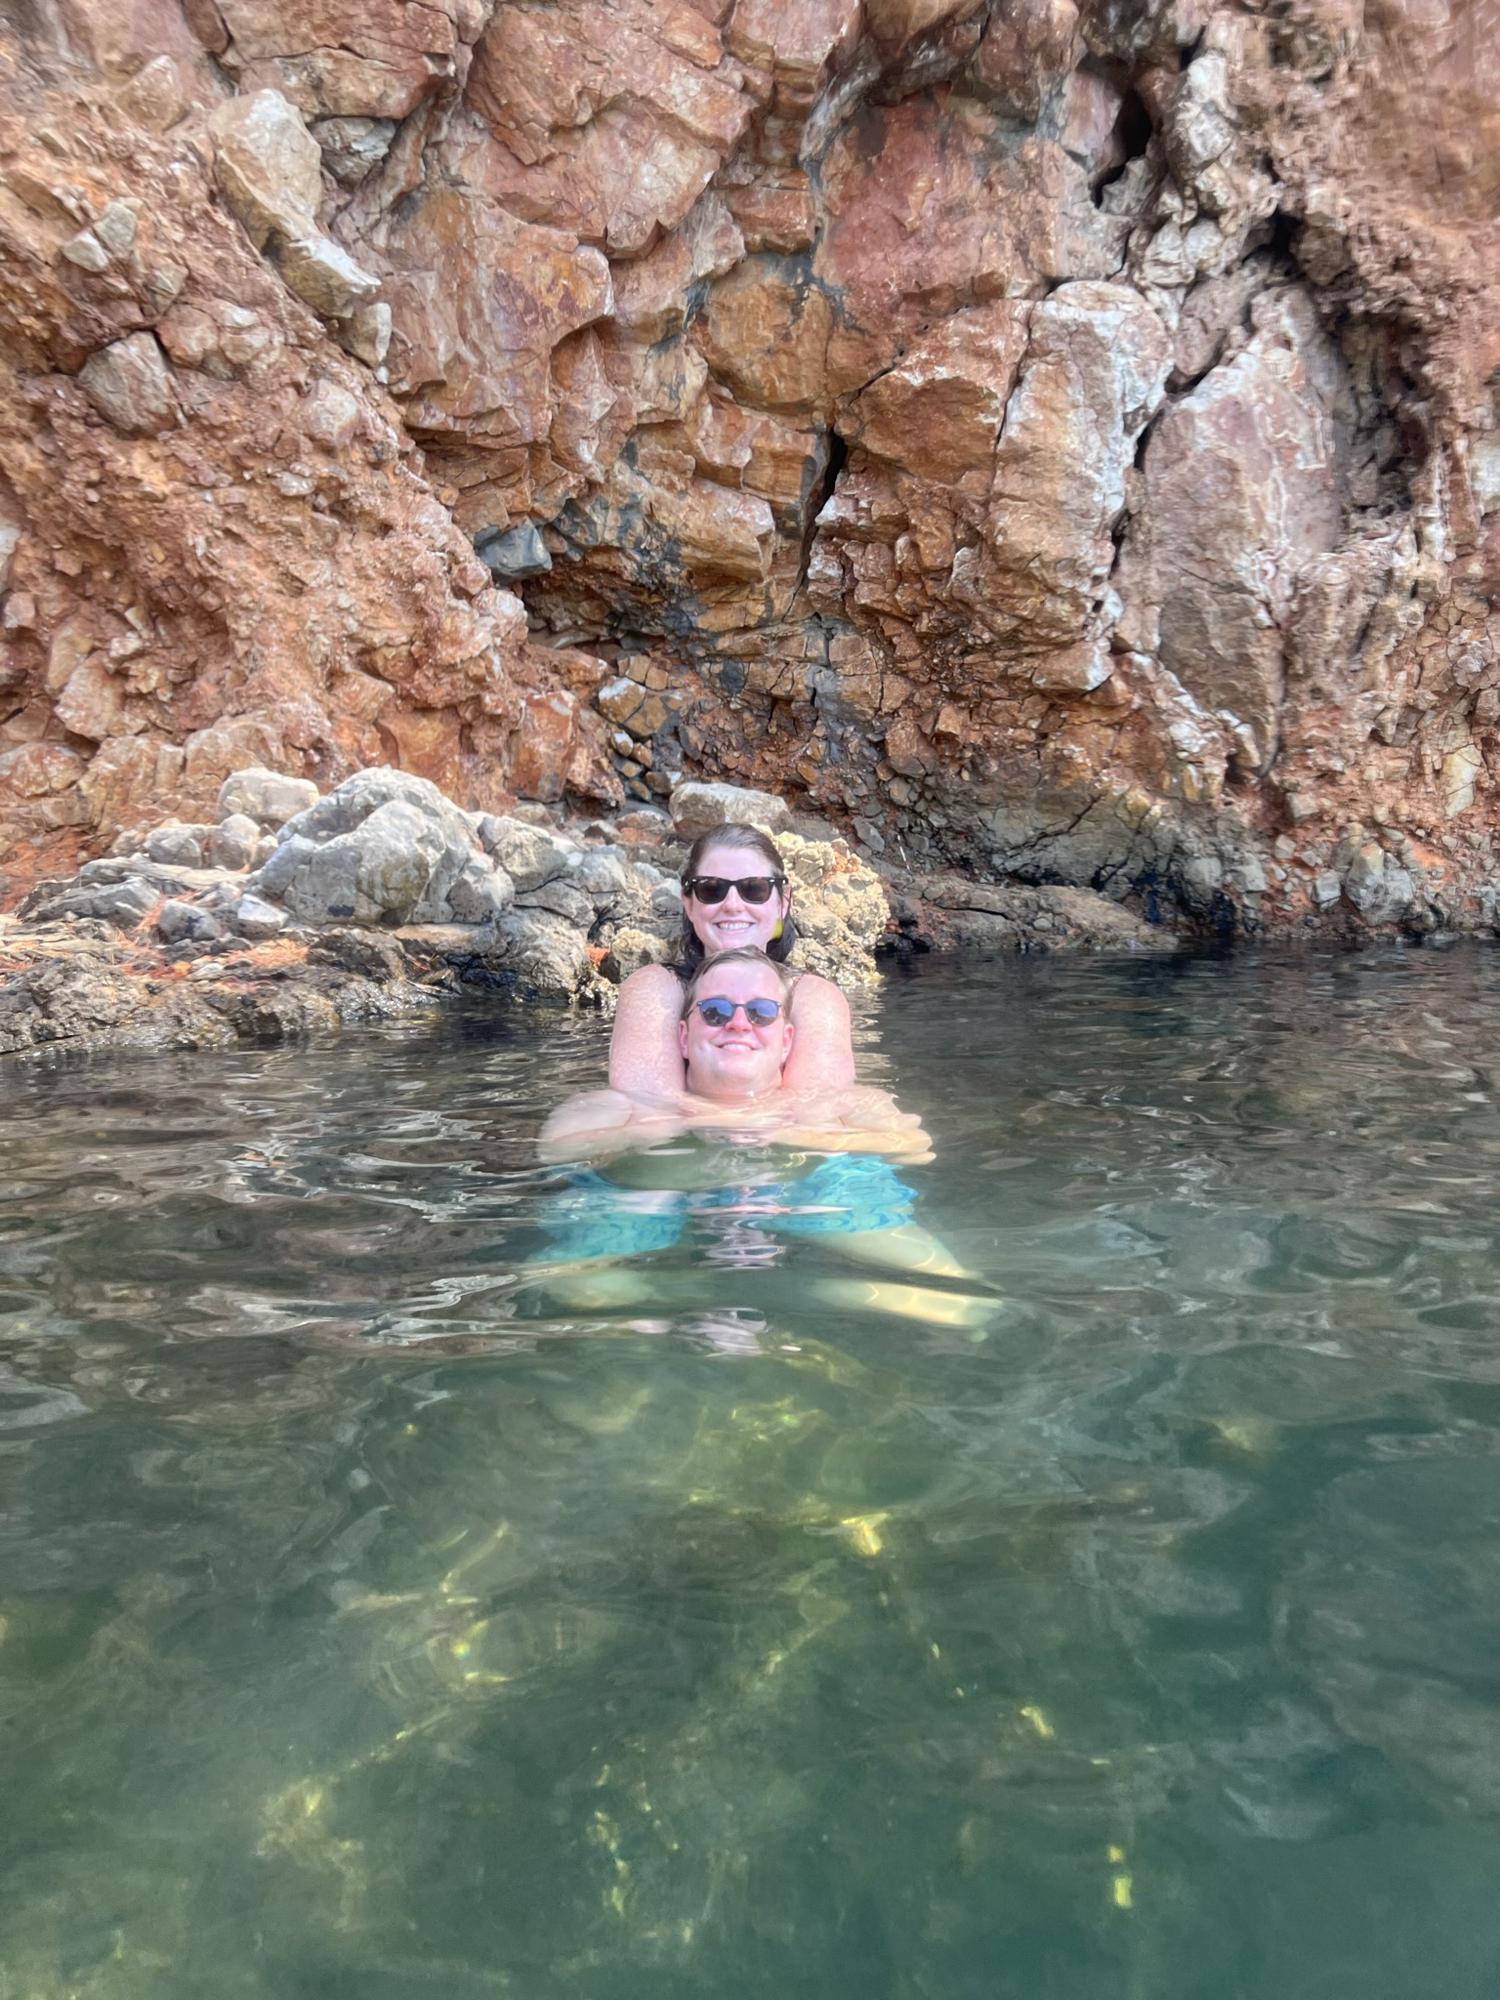 Lounging in a swimming hole near Dubrovnik, Croatia.  August 2022.